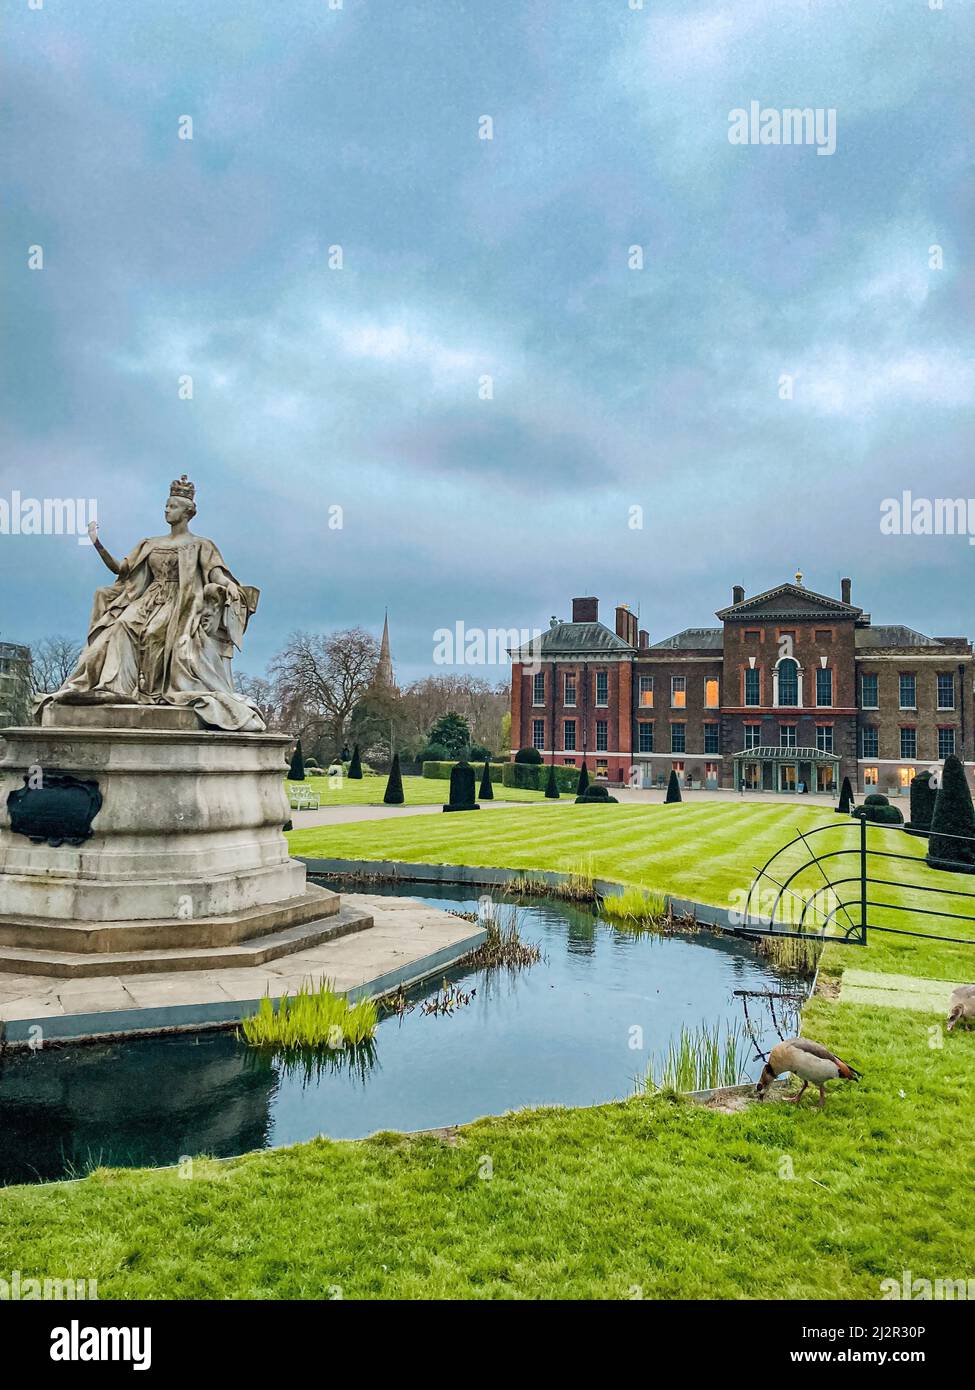 Statue of Queen Victoria in front of Kensington Palace on a cloudy day in Hyde Park, London Stock Photo